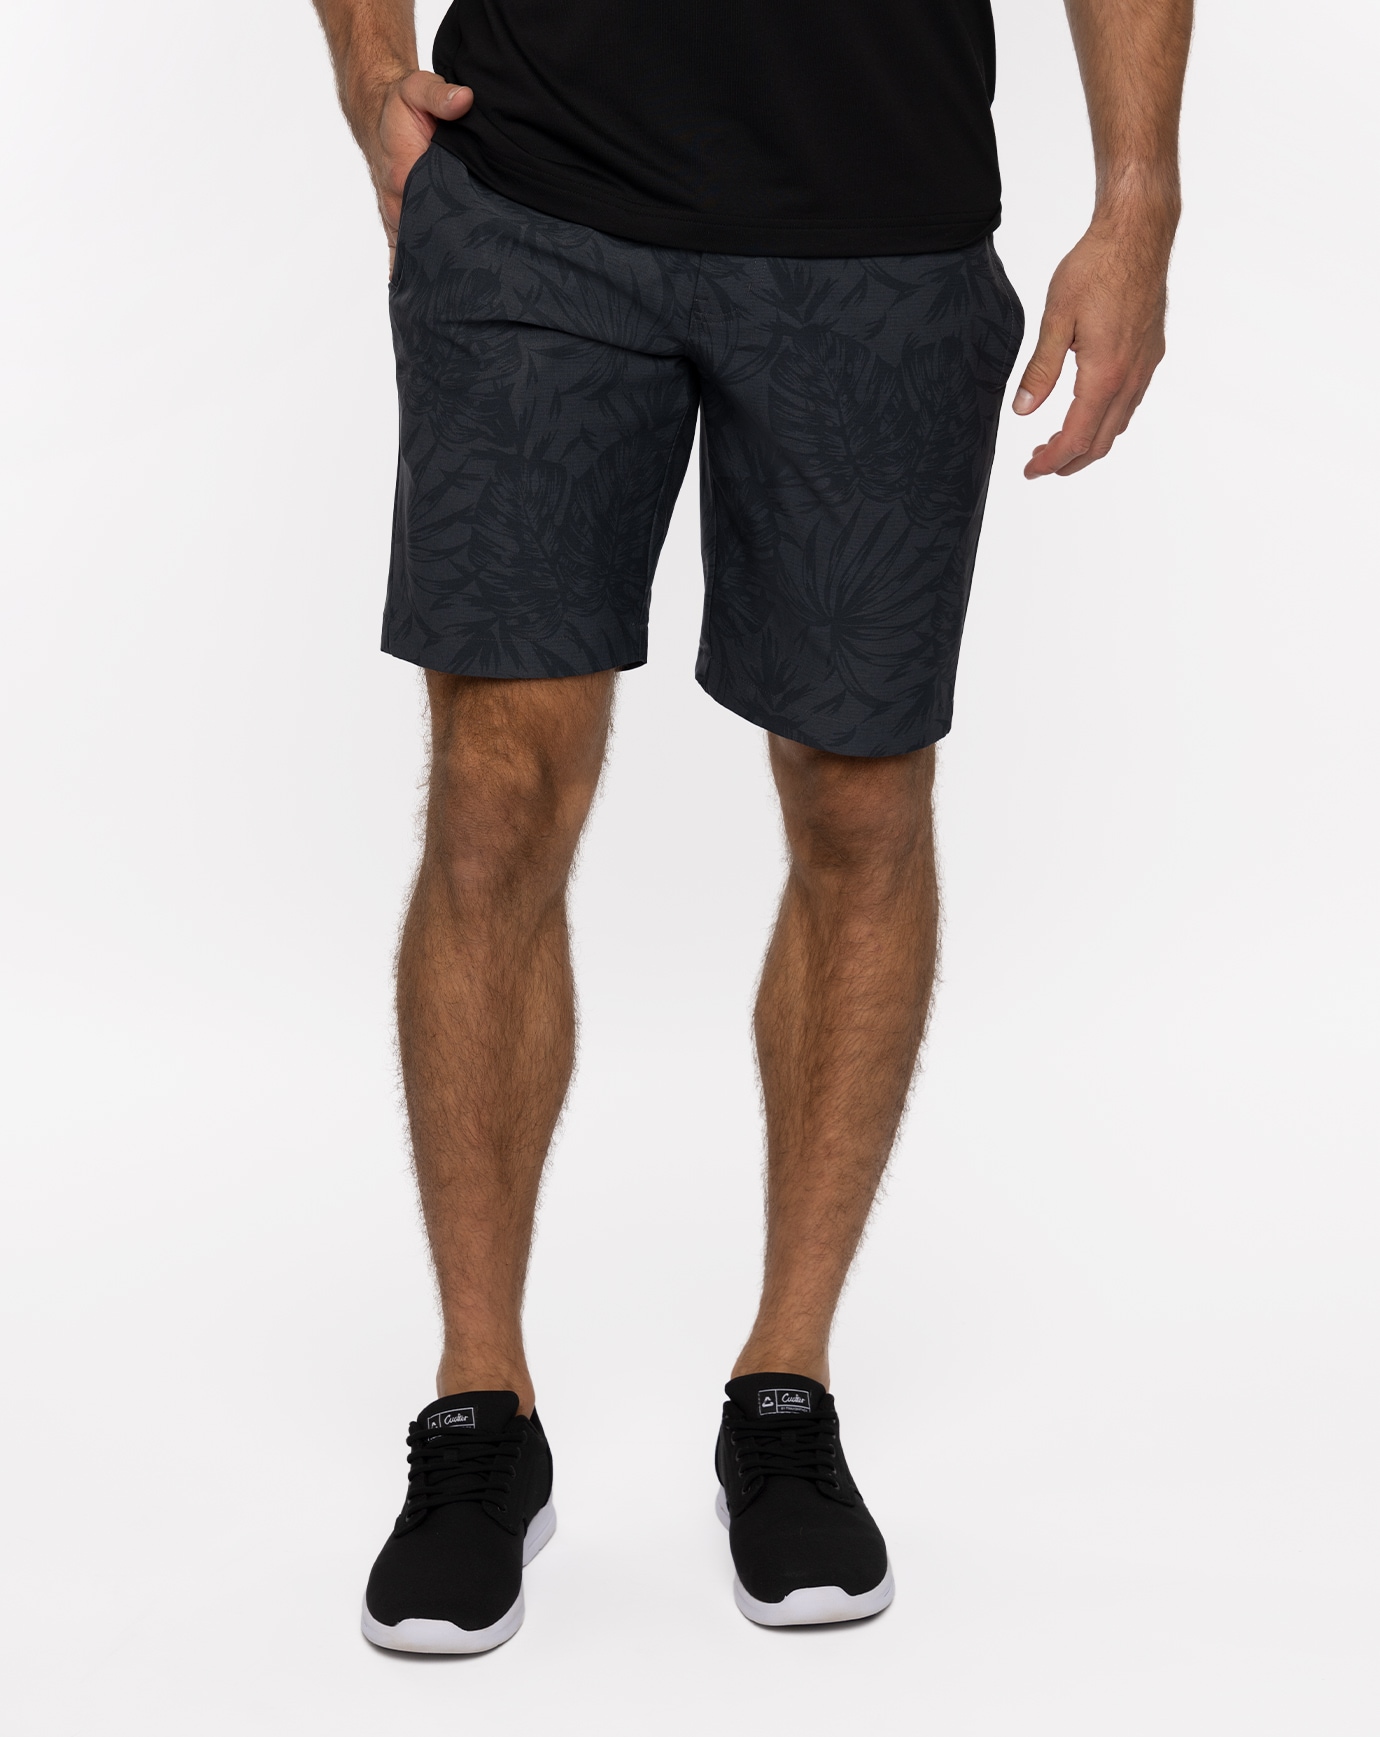 Related Product - BAREFOOT SUMMER SHORT